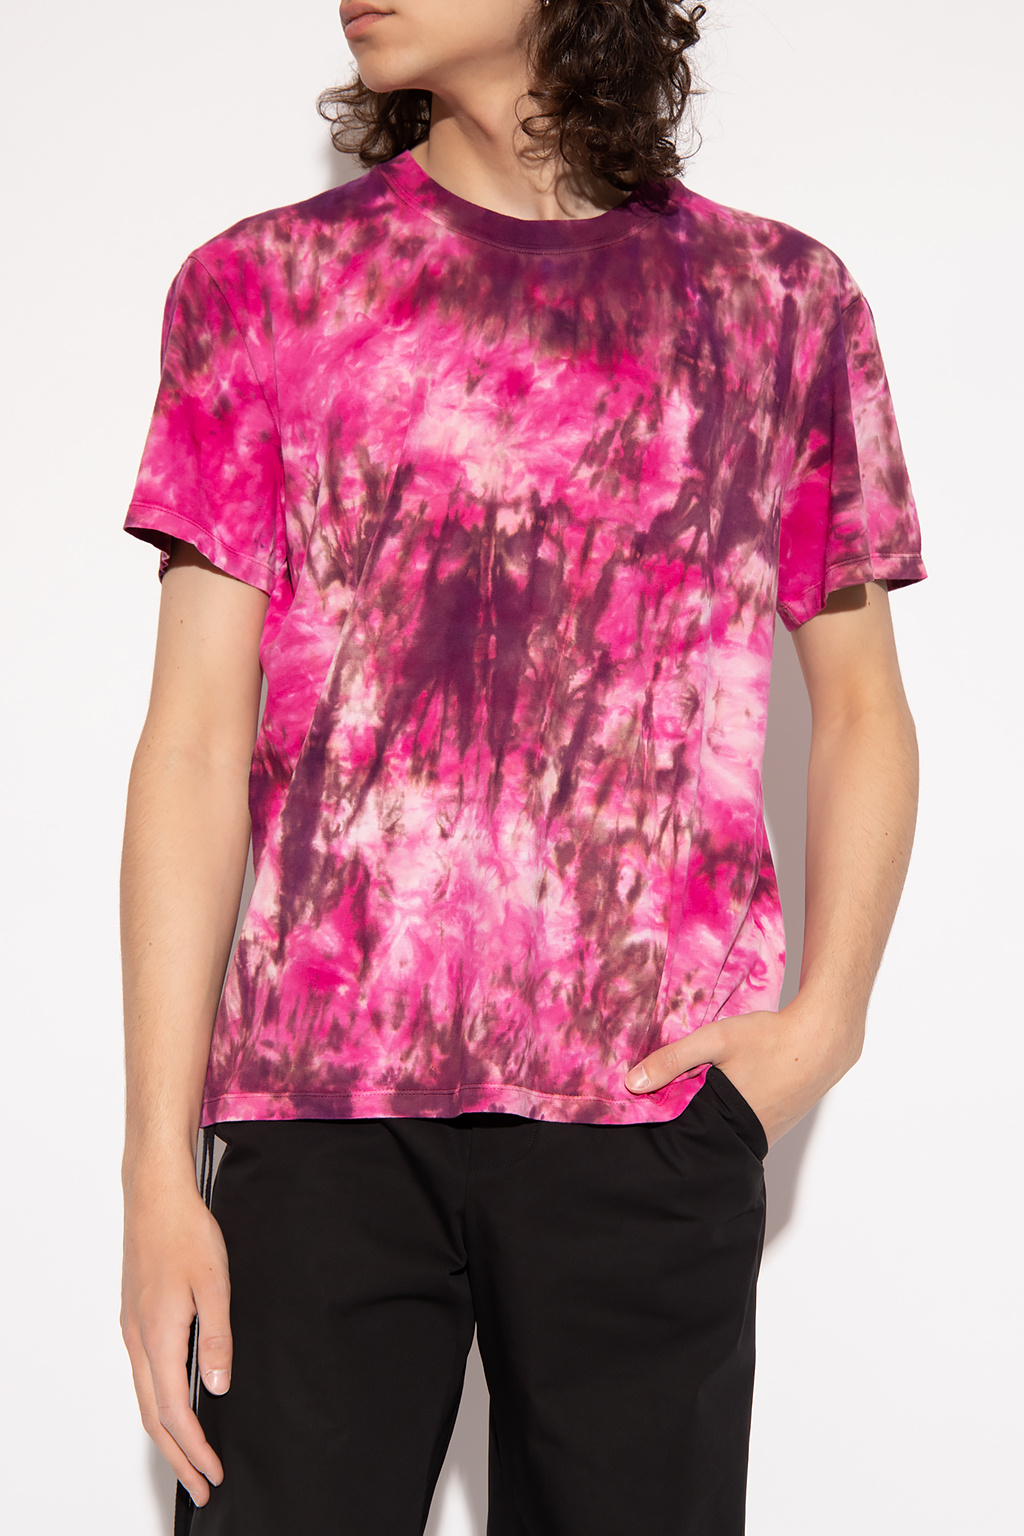 is expected to hit select Nike Sportswear retailers on September 6th Tie-dye T-shirt